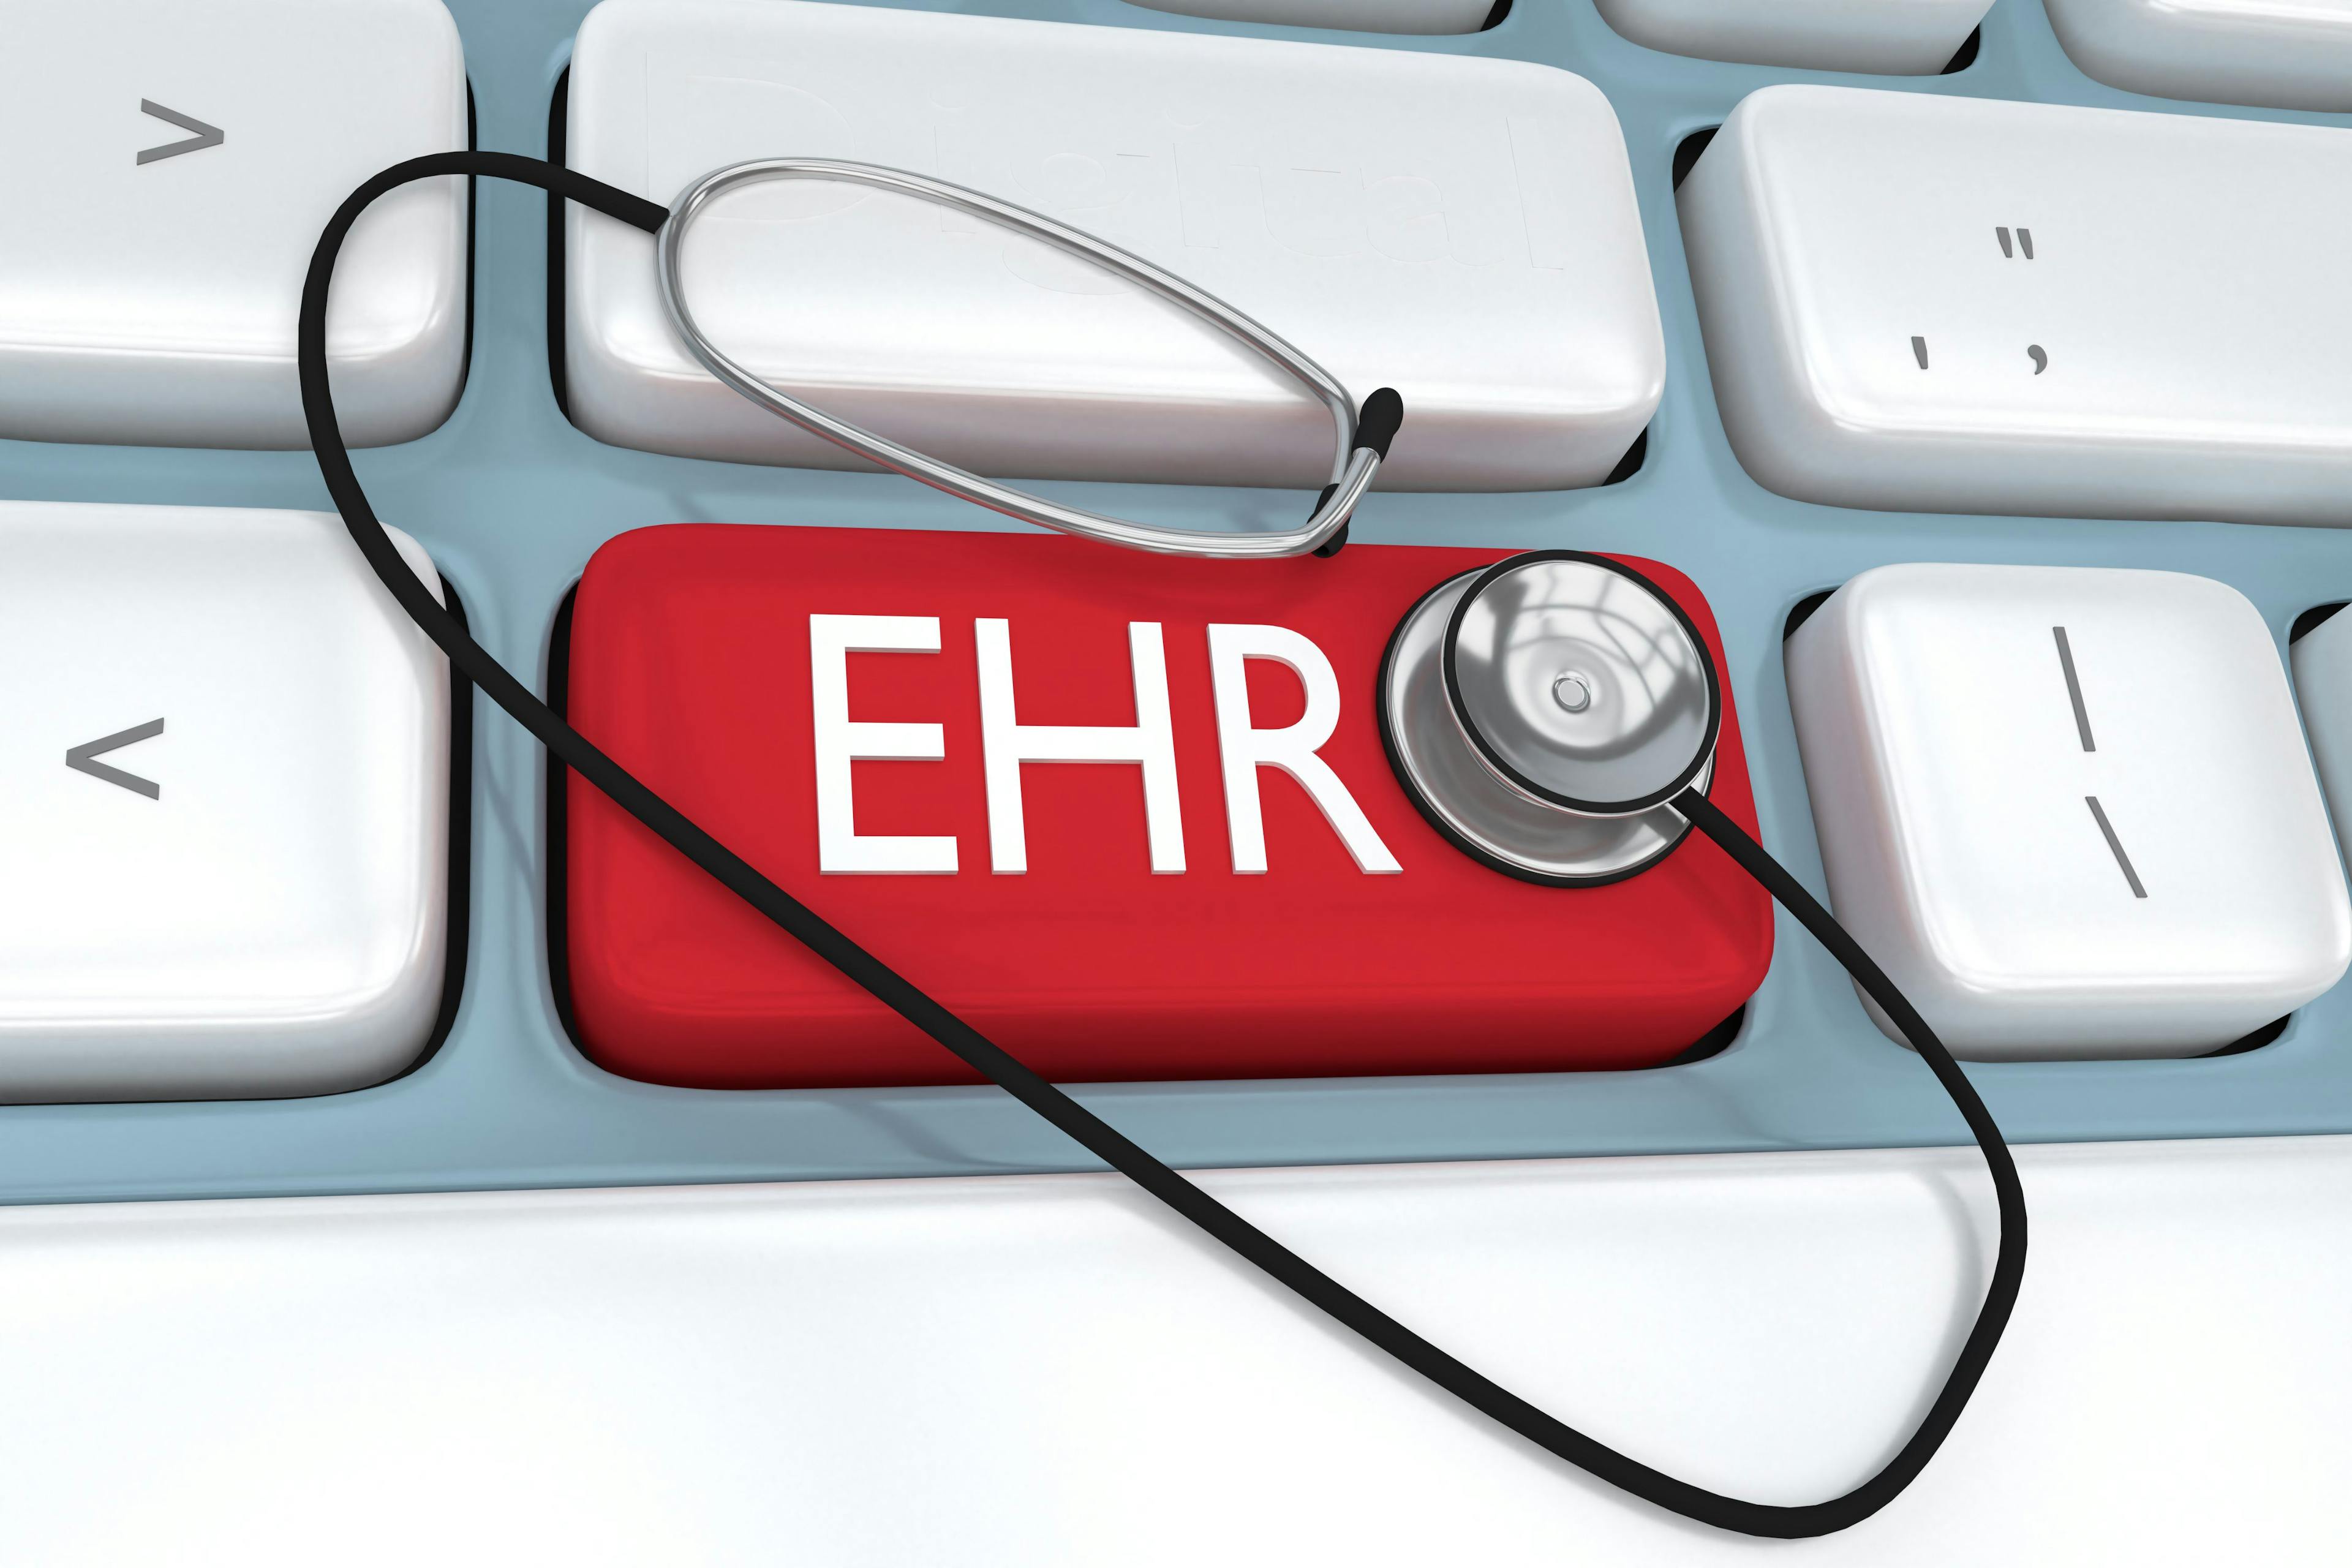 HHS launches physician use and burden of health IT tracking initiative